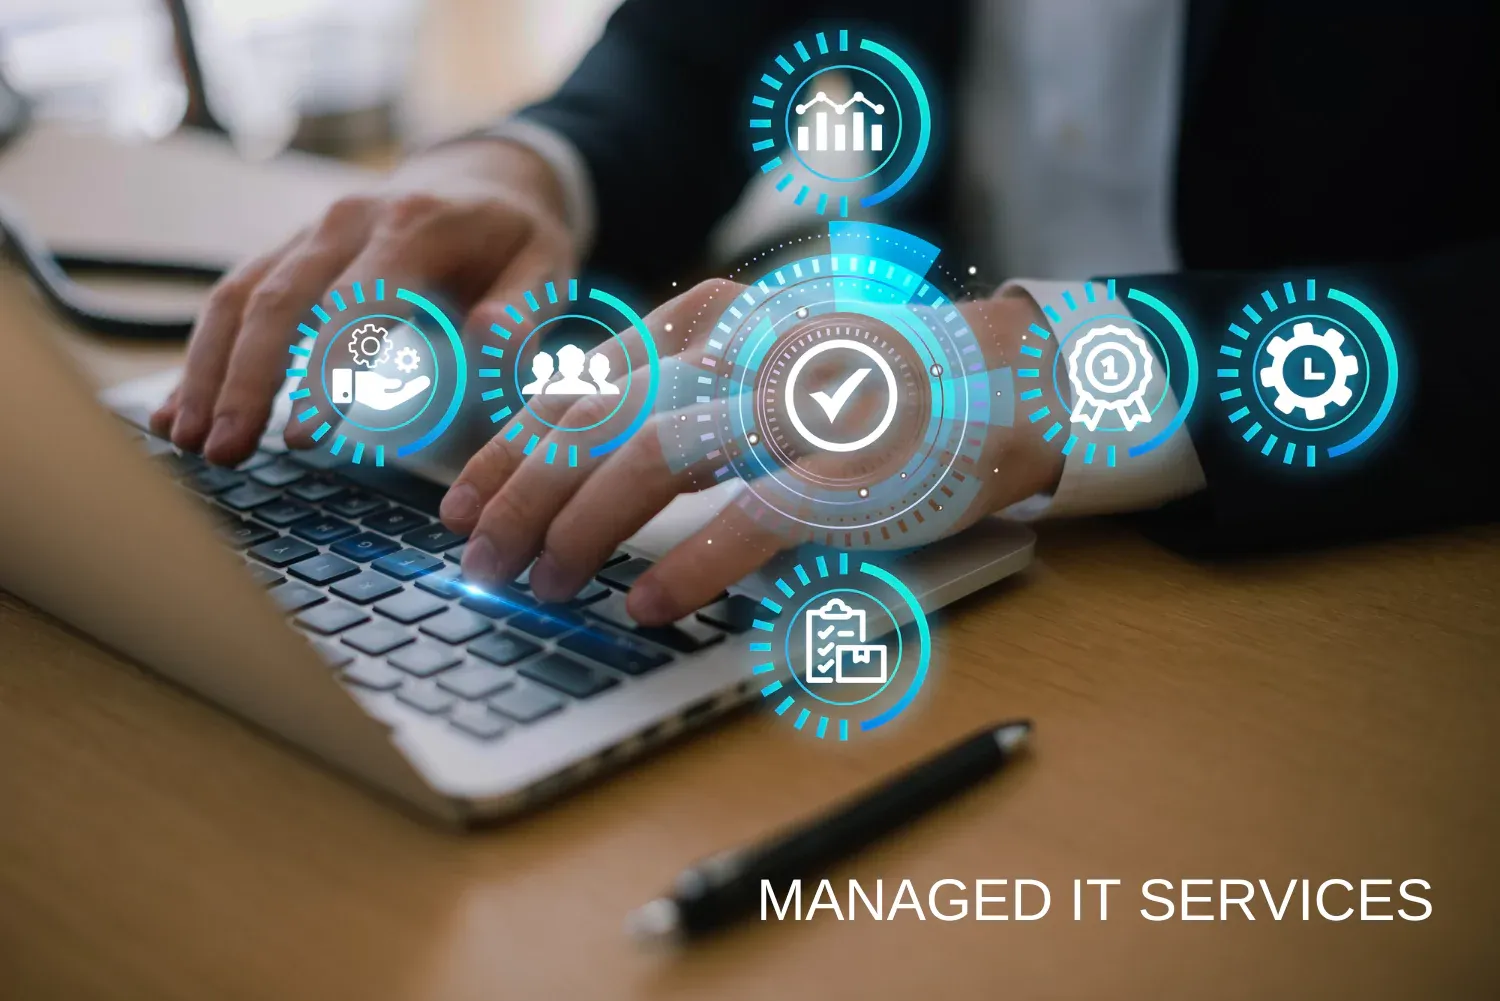 What are Managed IT Services?